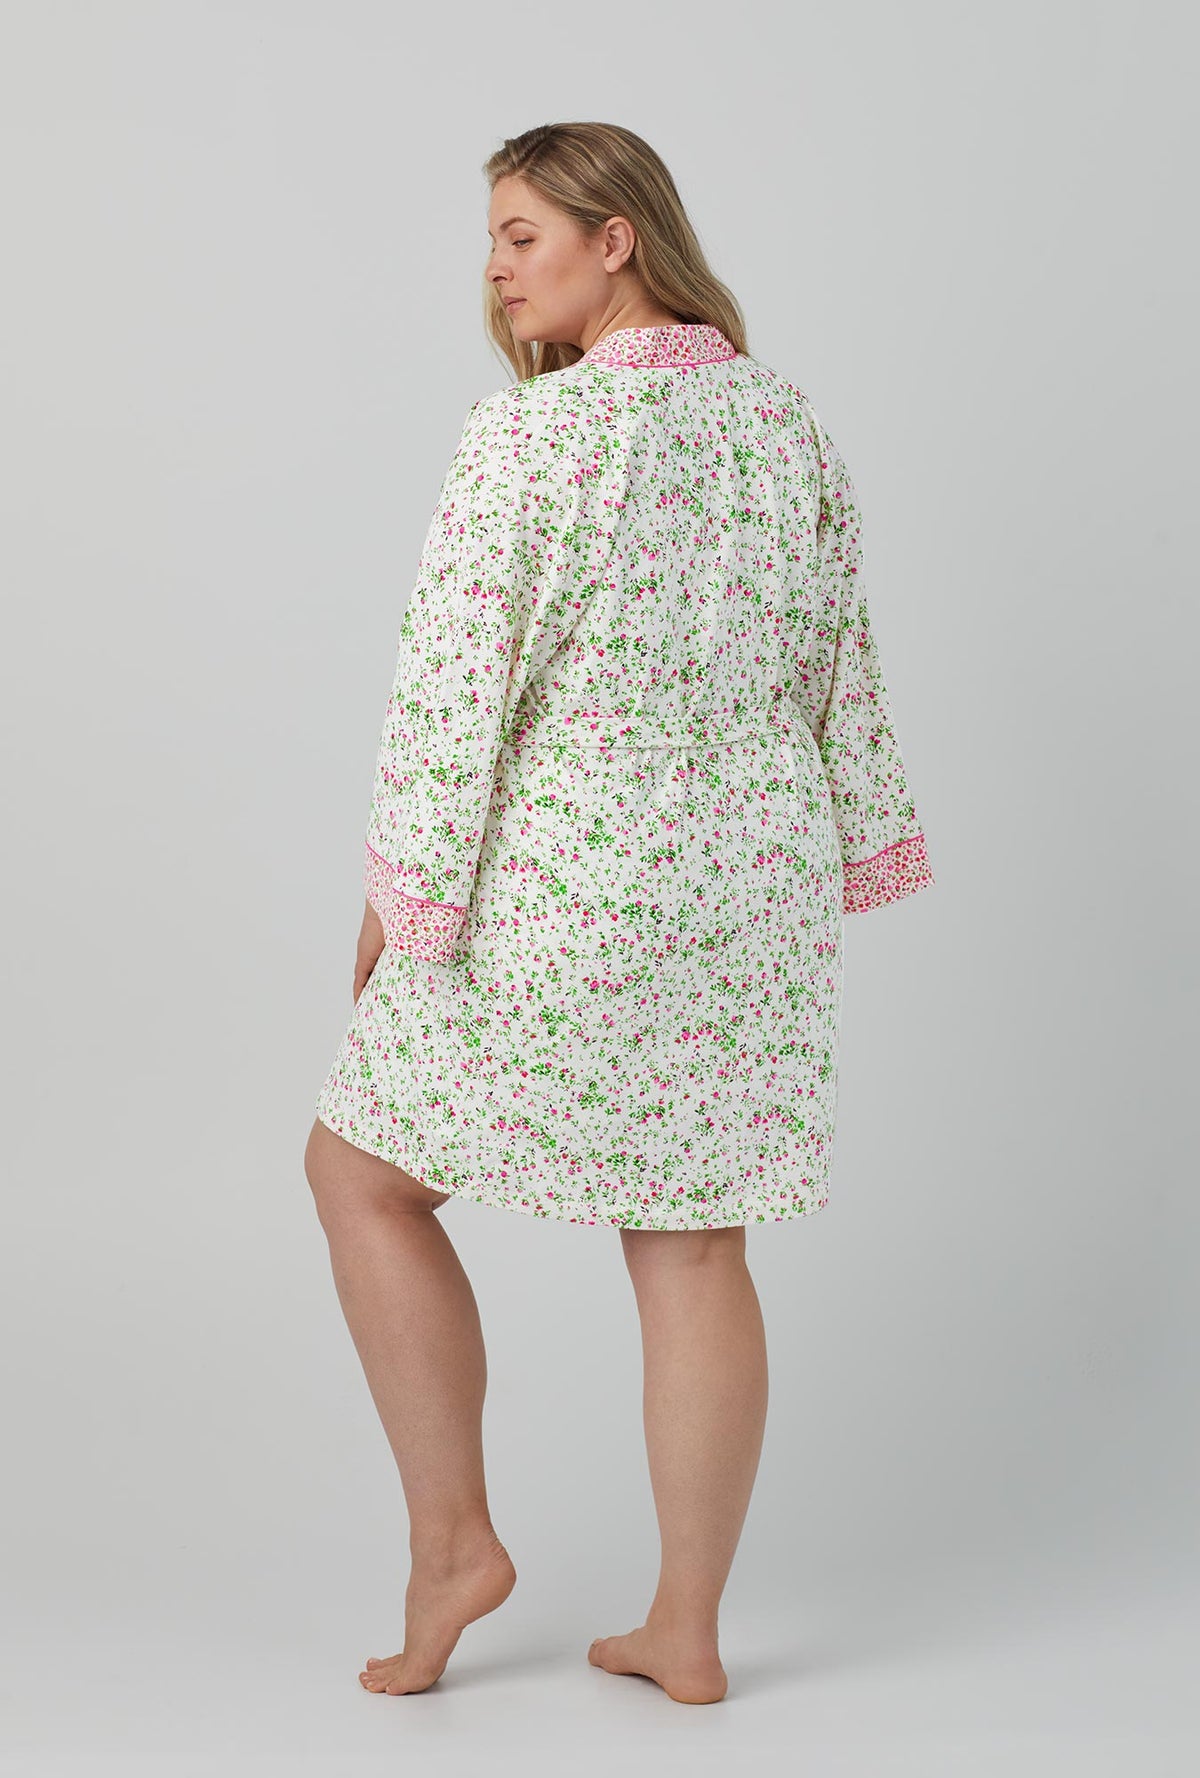 A lady wearing white Collar Stretch Jersey Robe with Nellie print